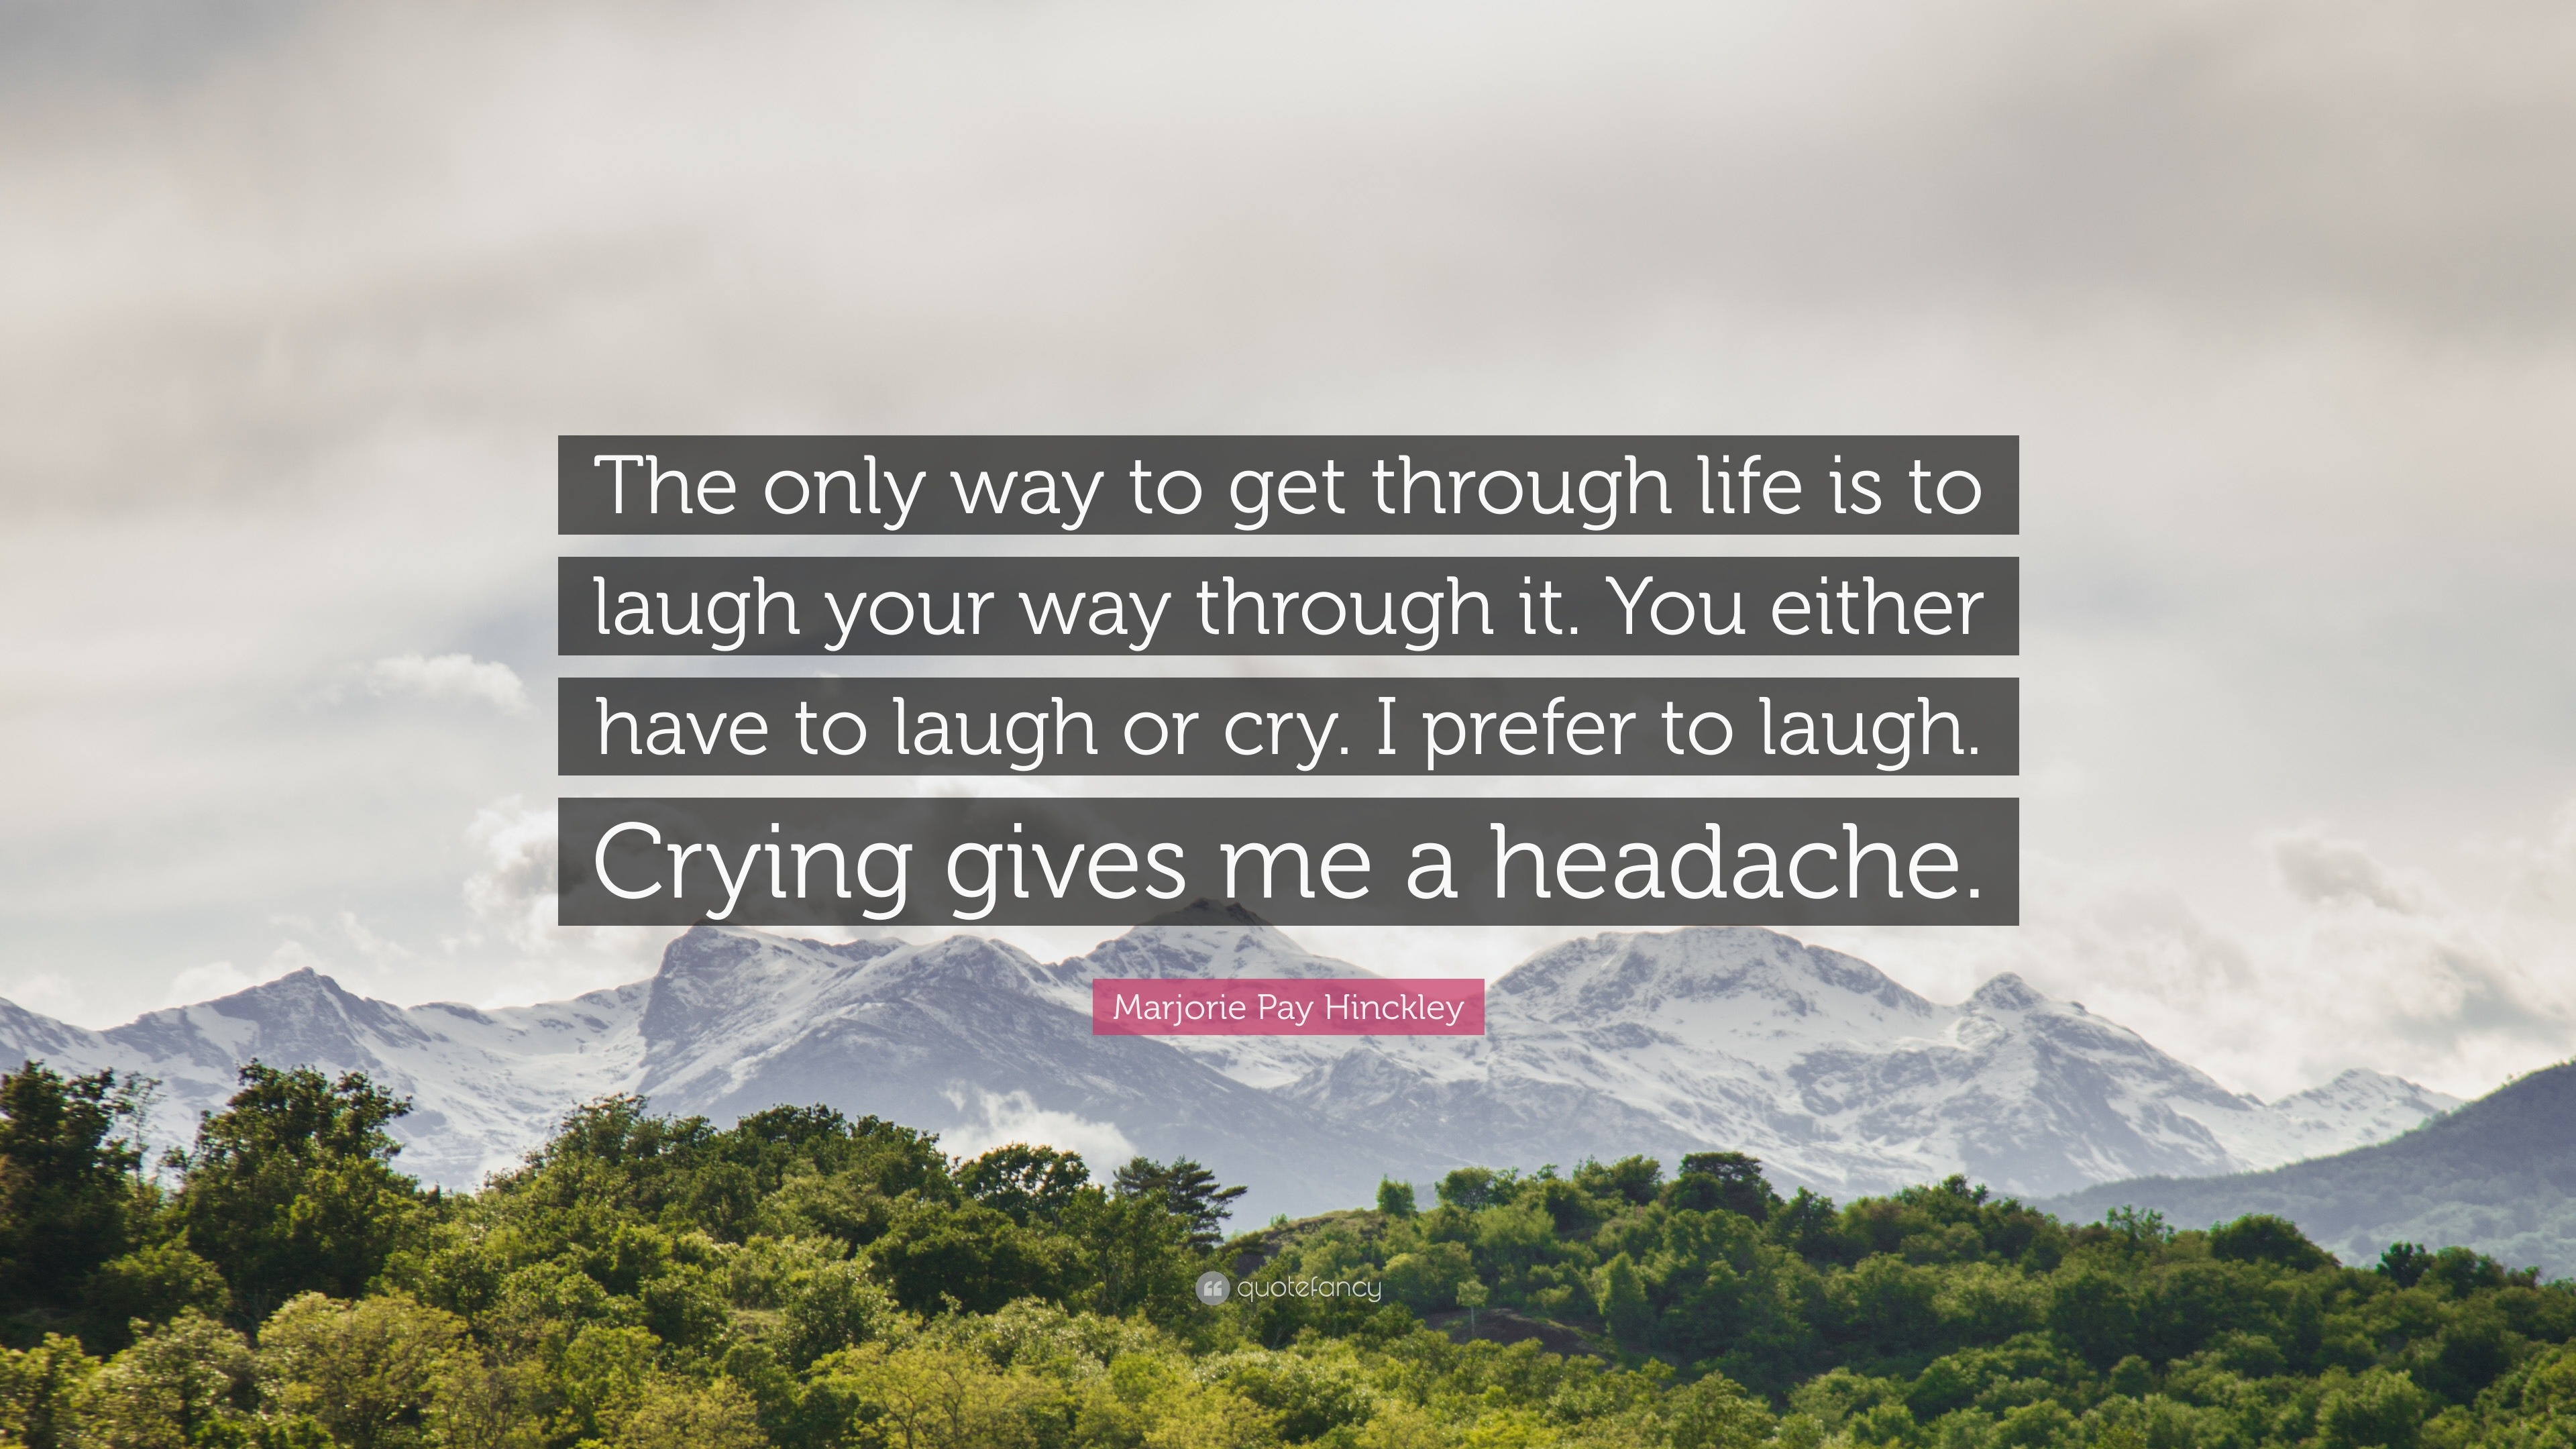 Marjorie Pay Hinckley Quote “The only way to through life is to laugh